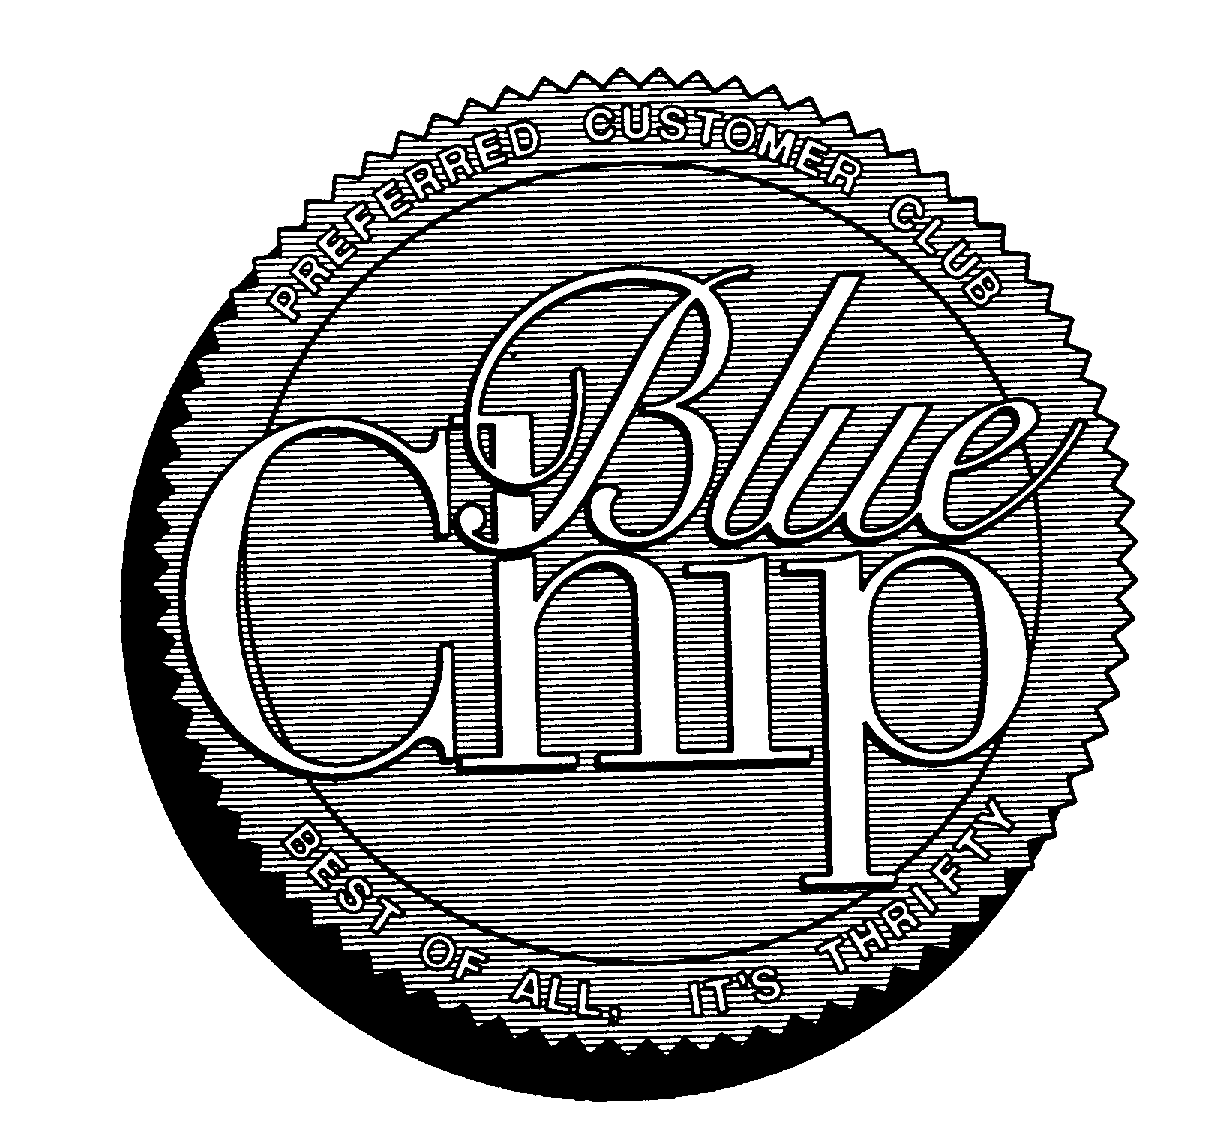  BLUE CHIP PREFERRED CUSTOMER CLUB BEST OF ALL, IT'S THRIFTY